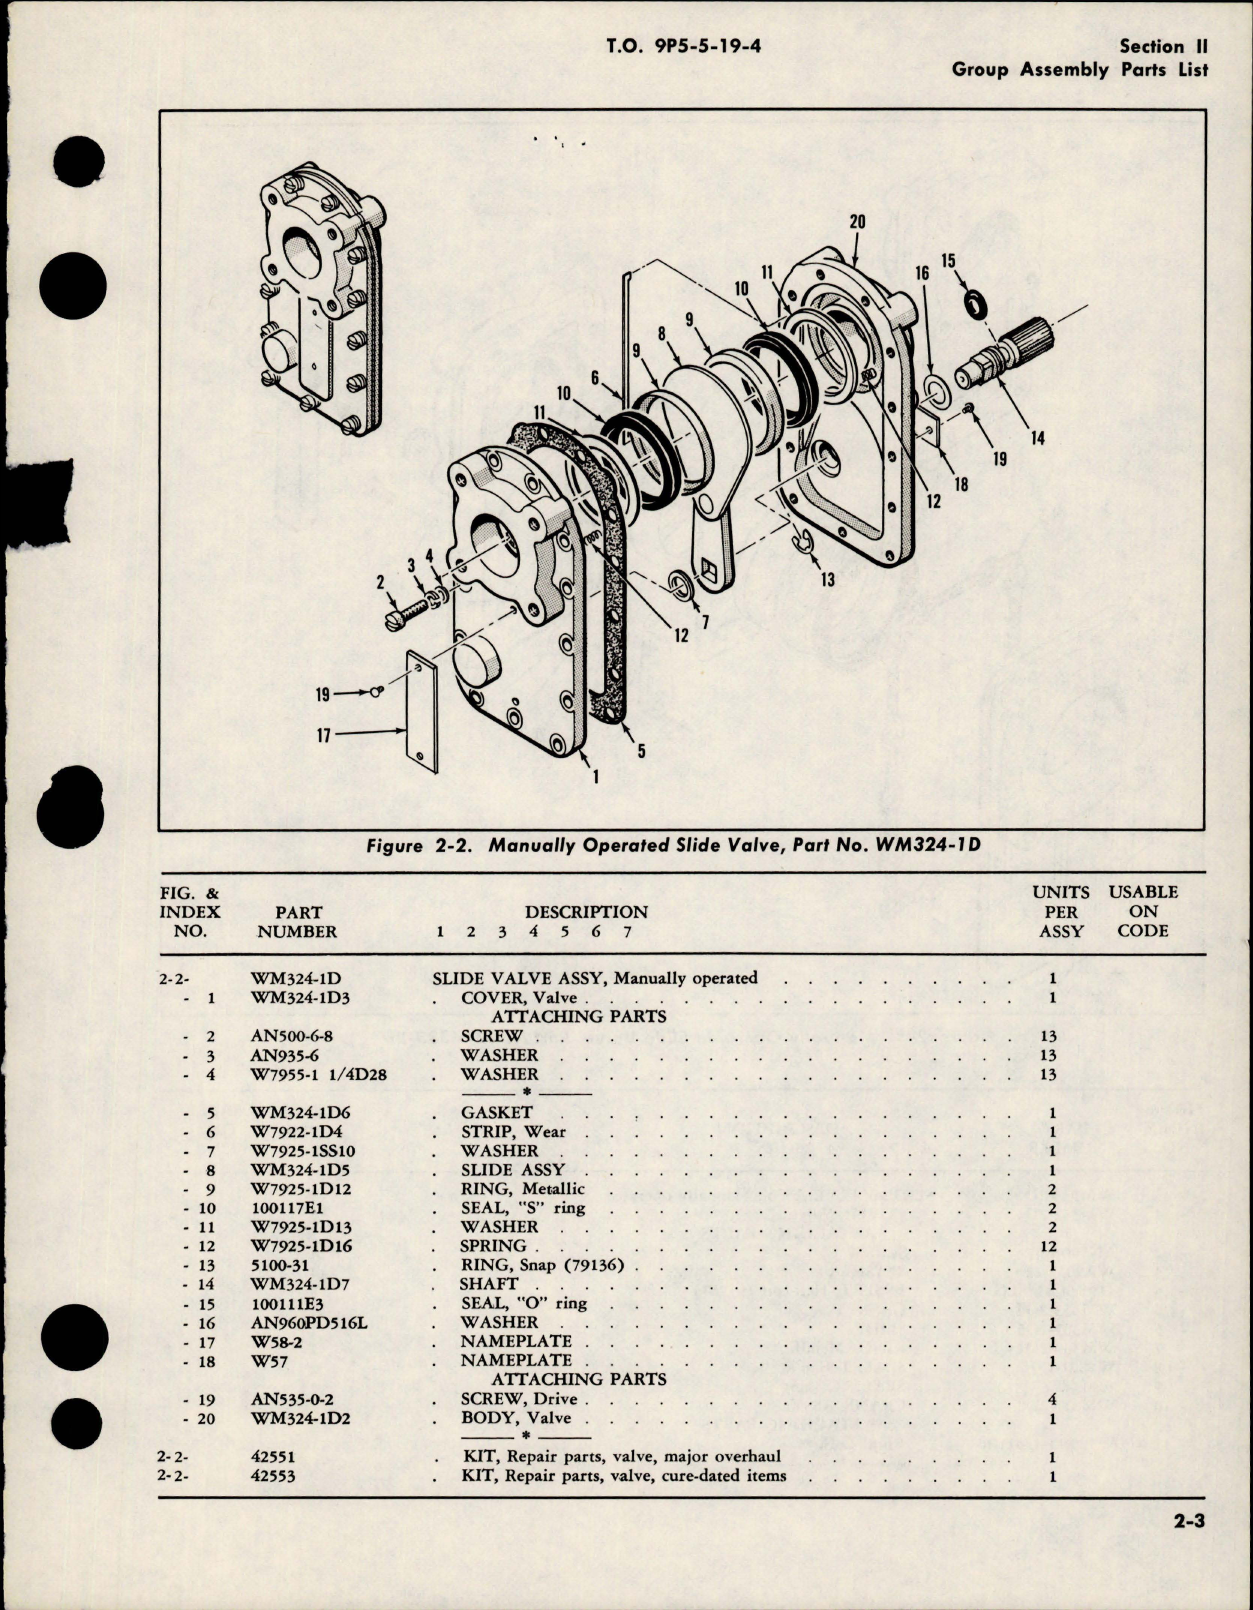 Sample page 9 from AirCorps Library document: Illustrated Parts Breakdown for Manually Operated Slide Valve Assemblies 